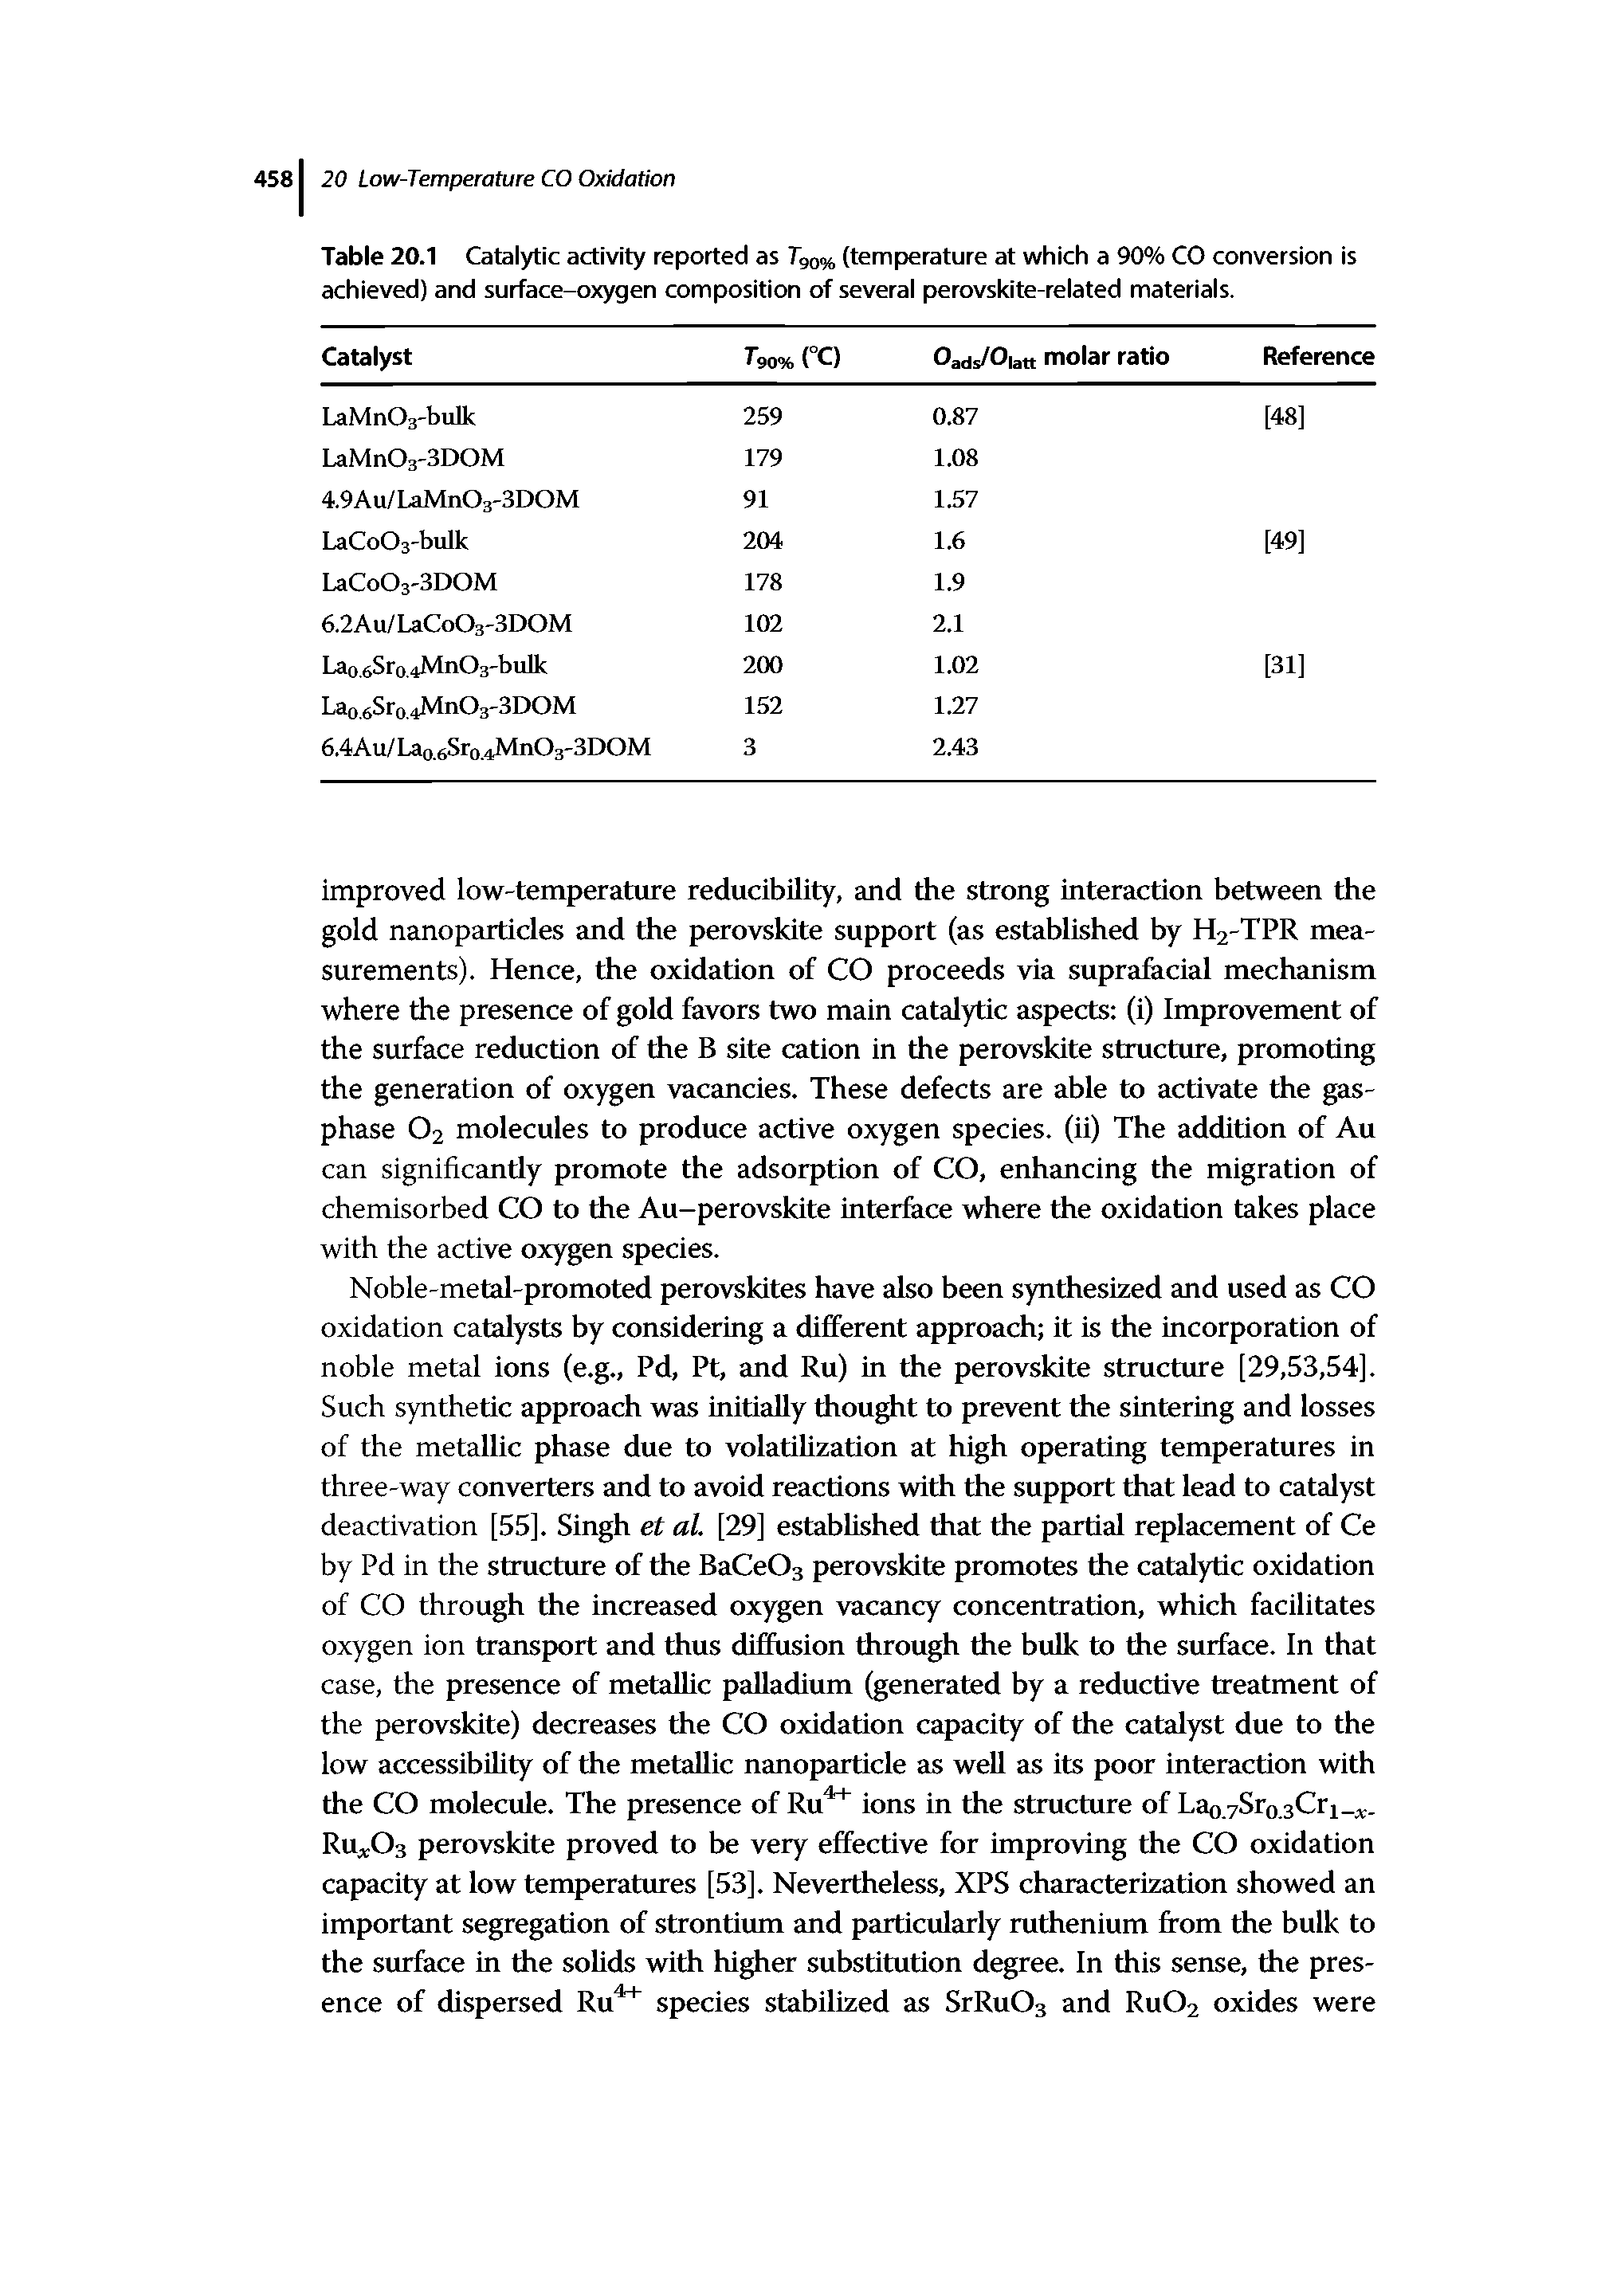 Table 20.1 Catalytic activity reported as Tgo% (temperature at which a 90% CO conversion is achieved) and surface-oxygen composition of several perovskite-related materials.